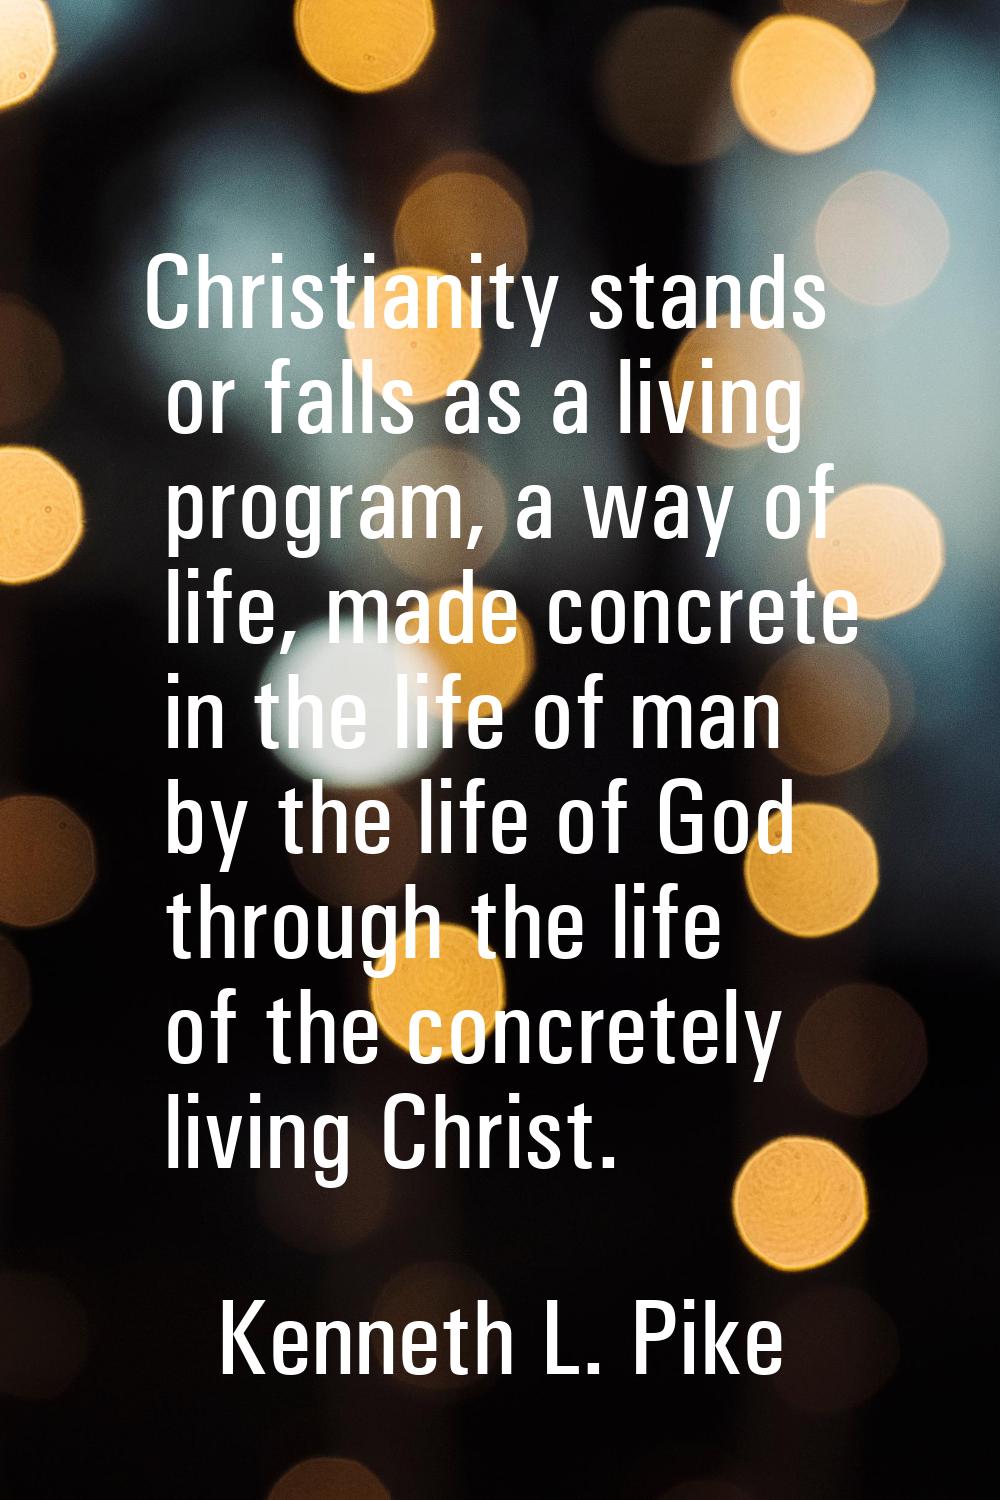 Christianity stands or falls as a living program, a way of life, made concrete in the life of man b